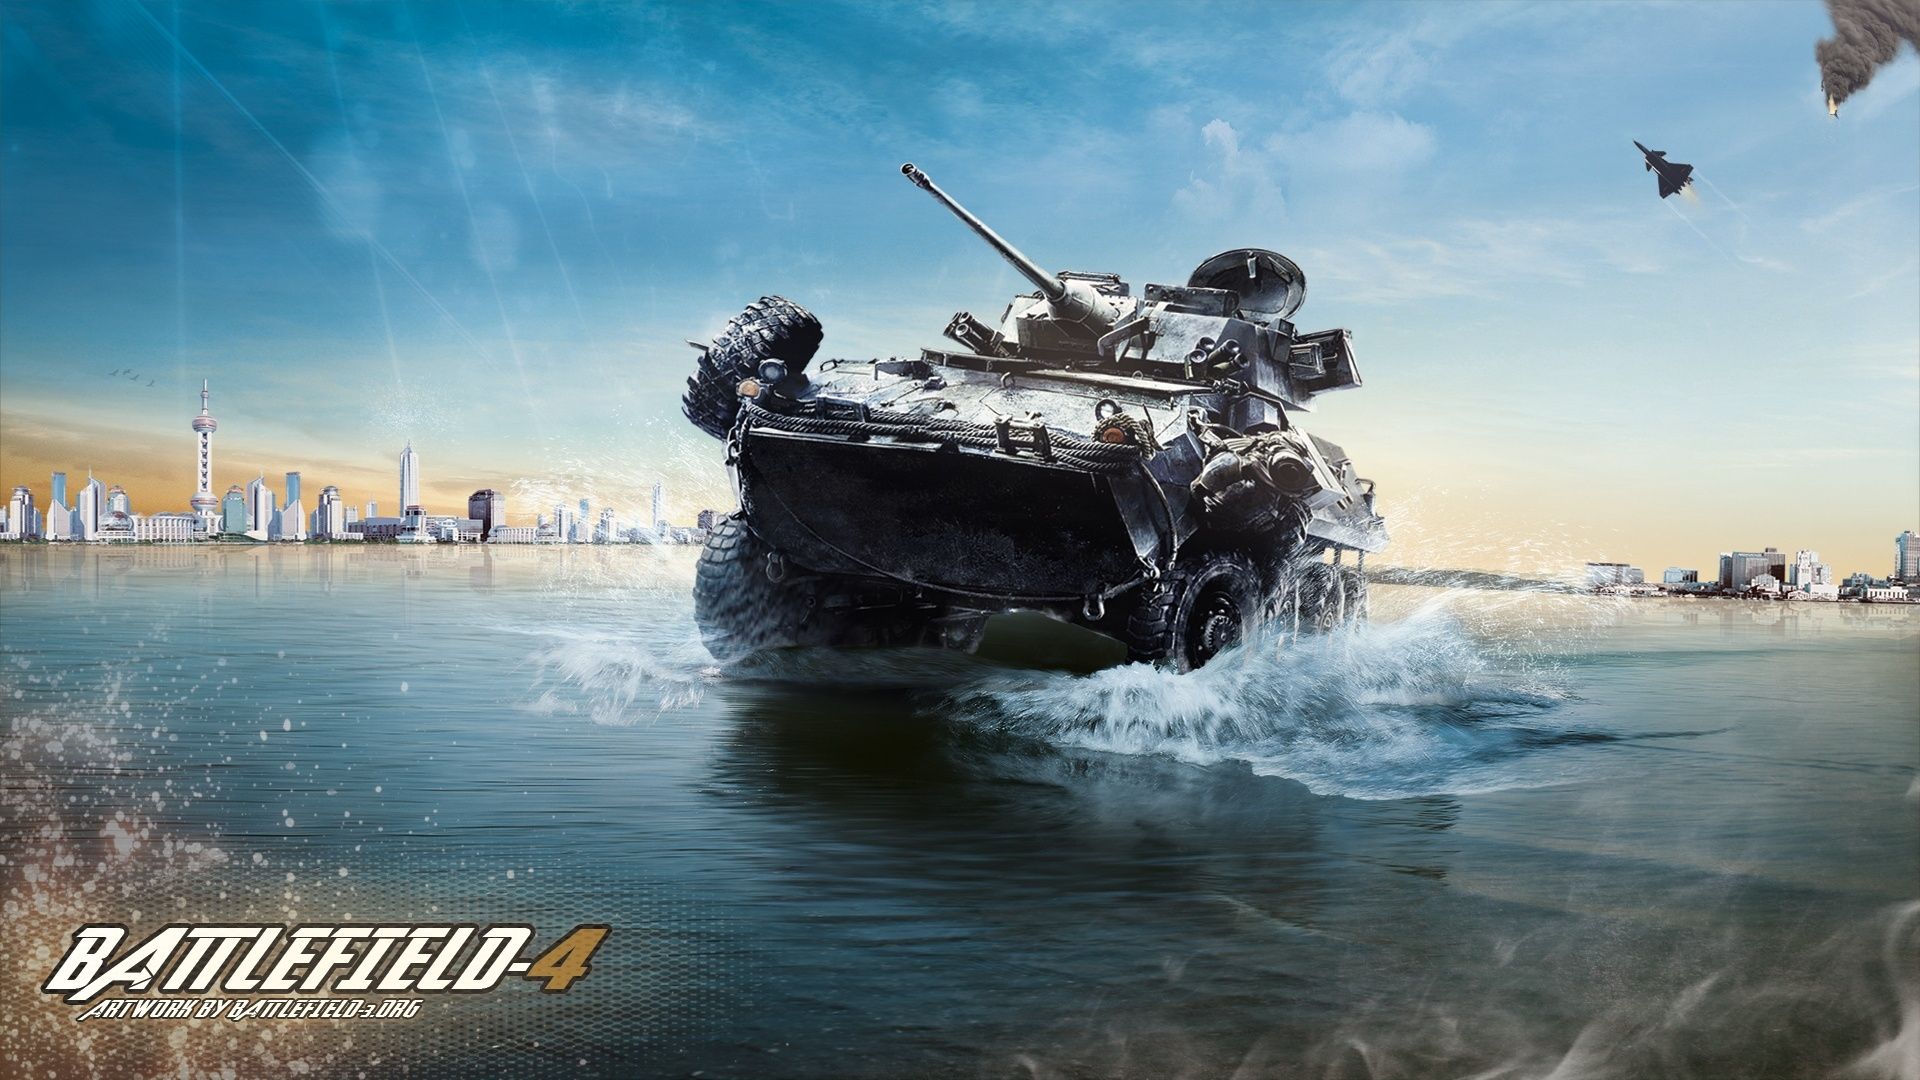 Wallpaper Battlefield armored vehicles ashore 1920x1080 Full HD 2K Picture, Image